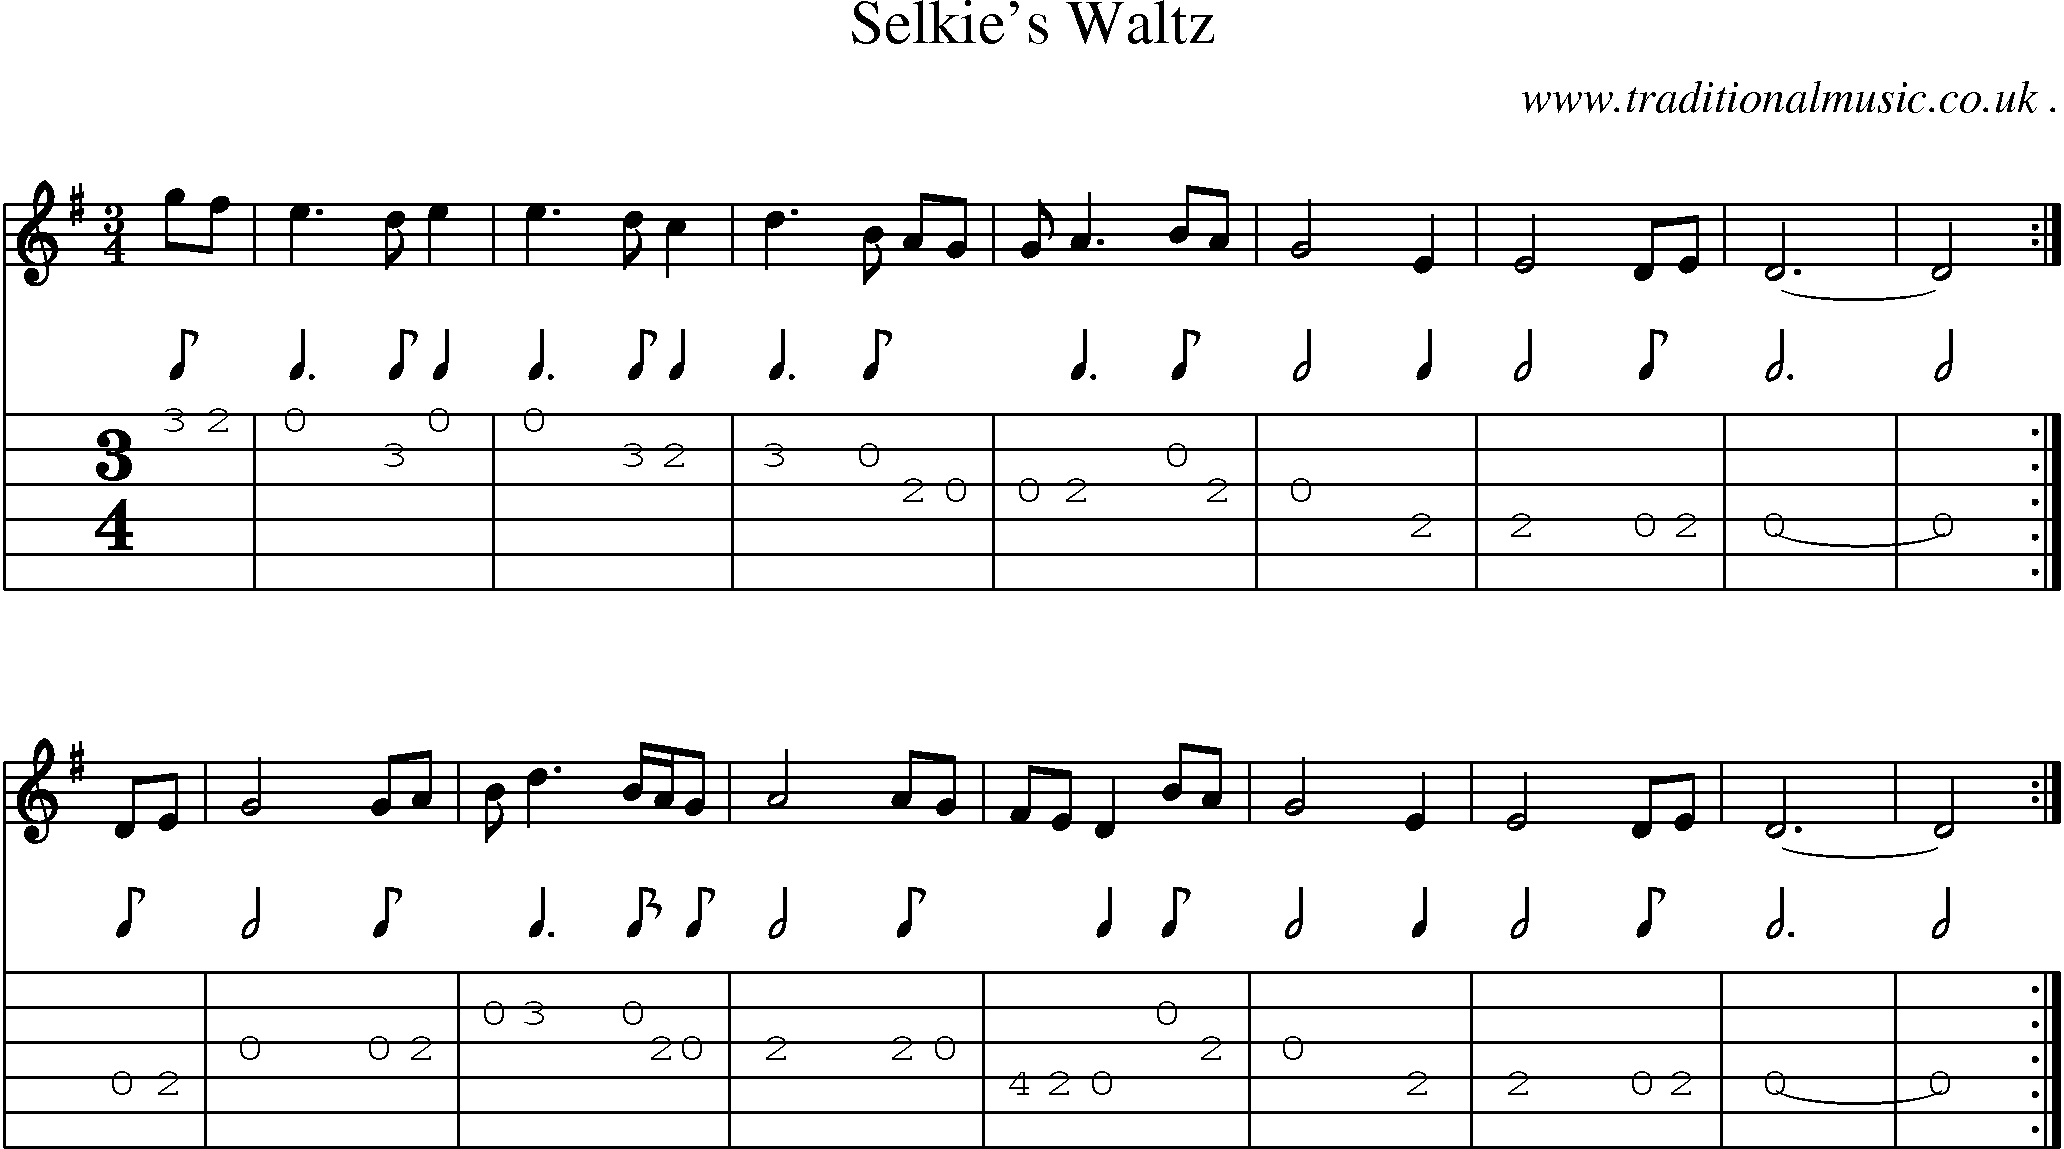 Sheet-music  score, Chords and Guitar Tabs for Selkies Waltz